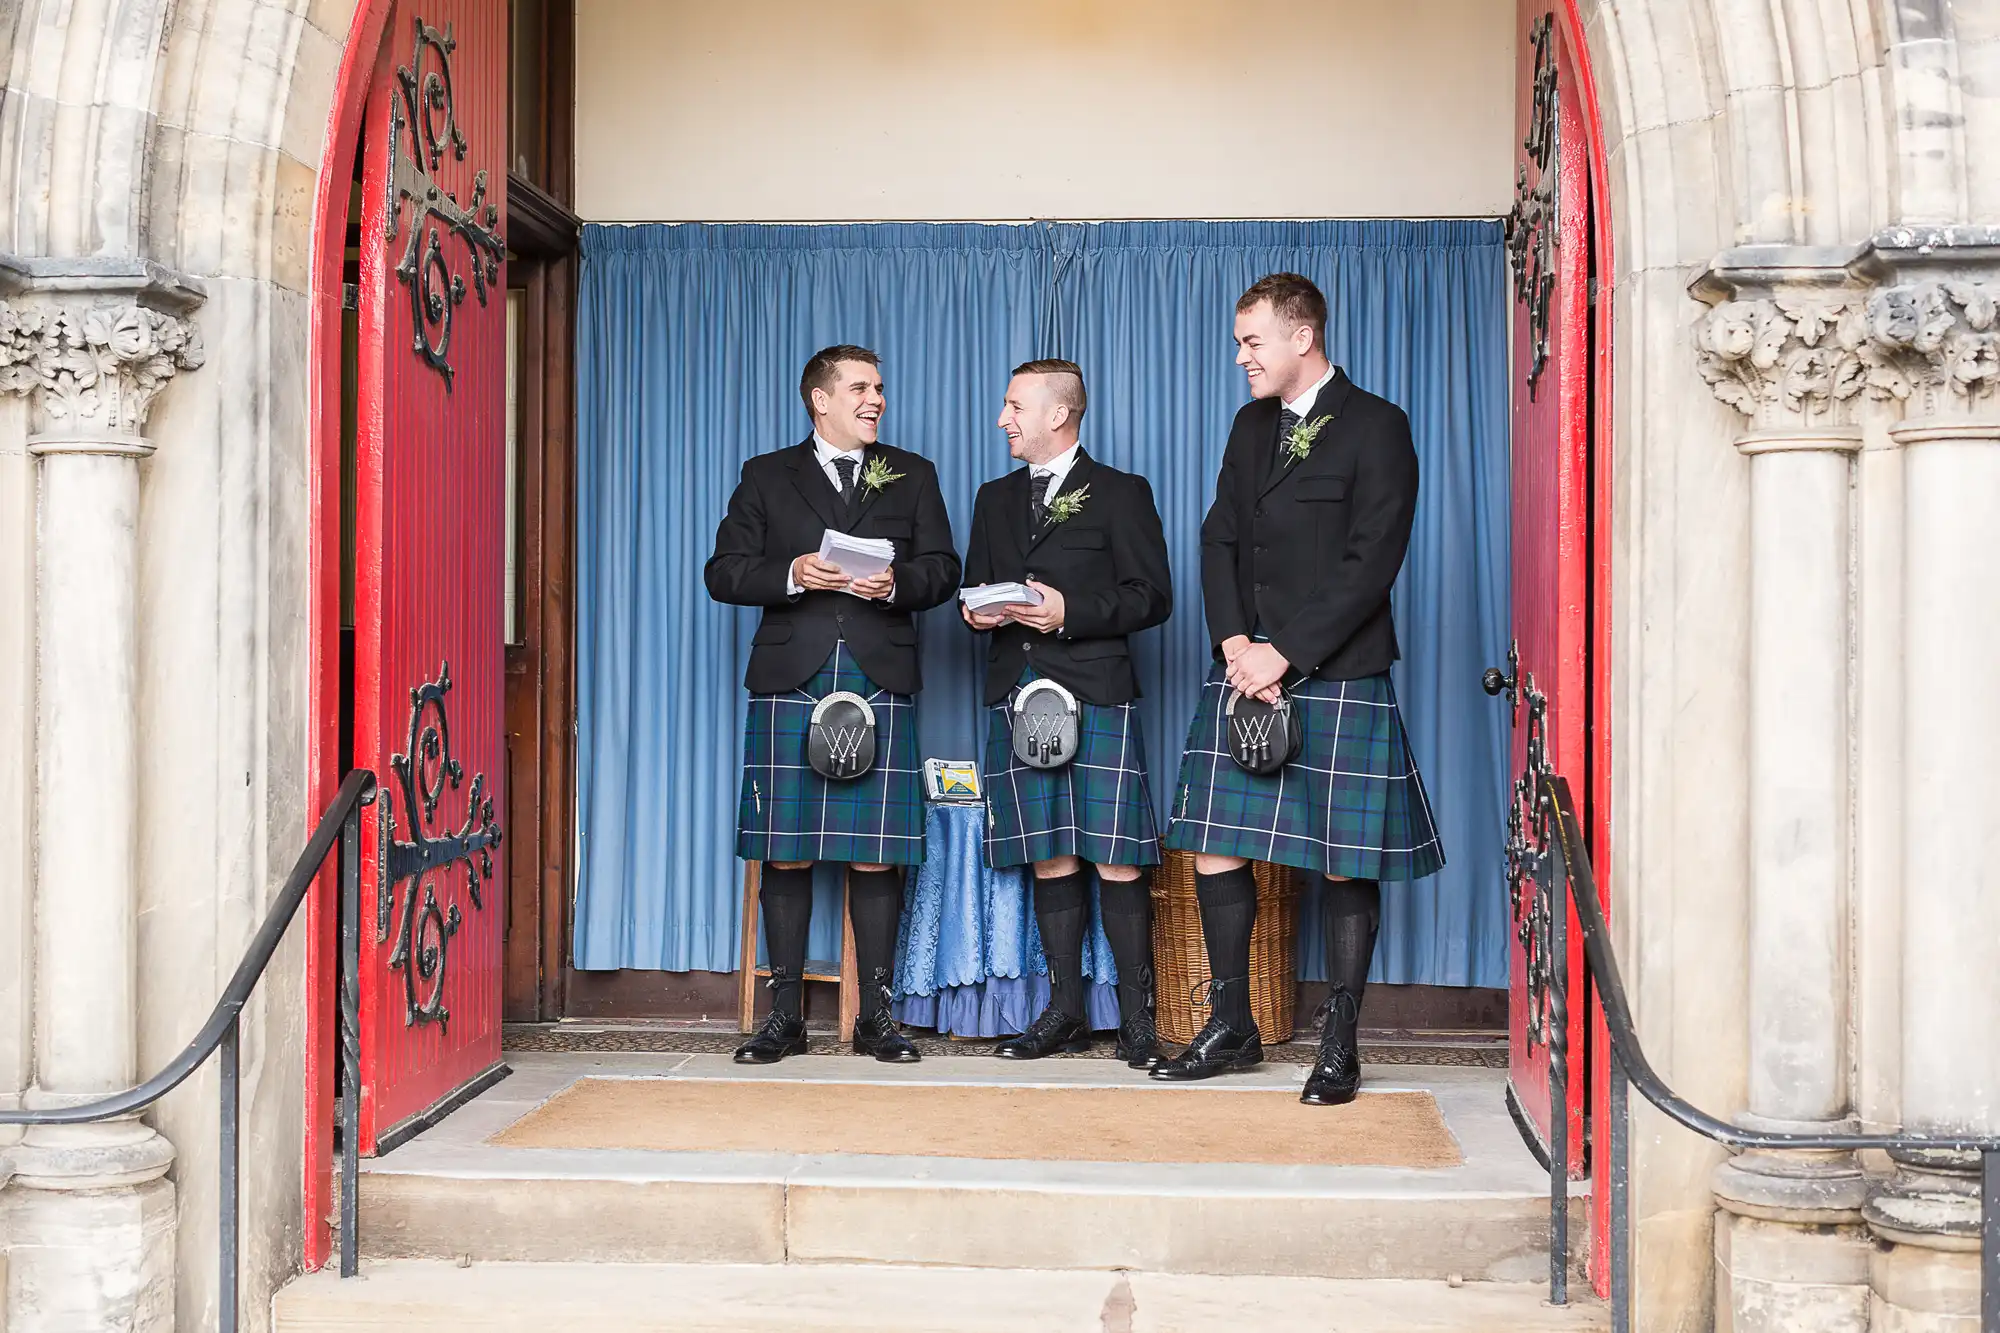 Three men in traditional scottish kilts and accessories stand laughing at a church doorway, with one holding a ceremonial booklet.